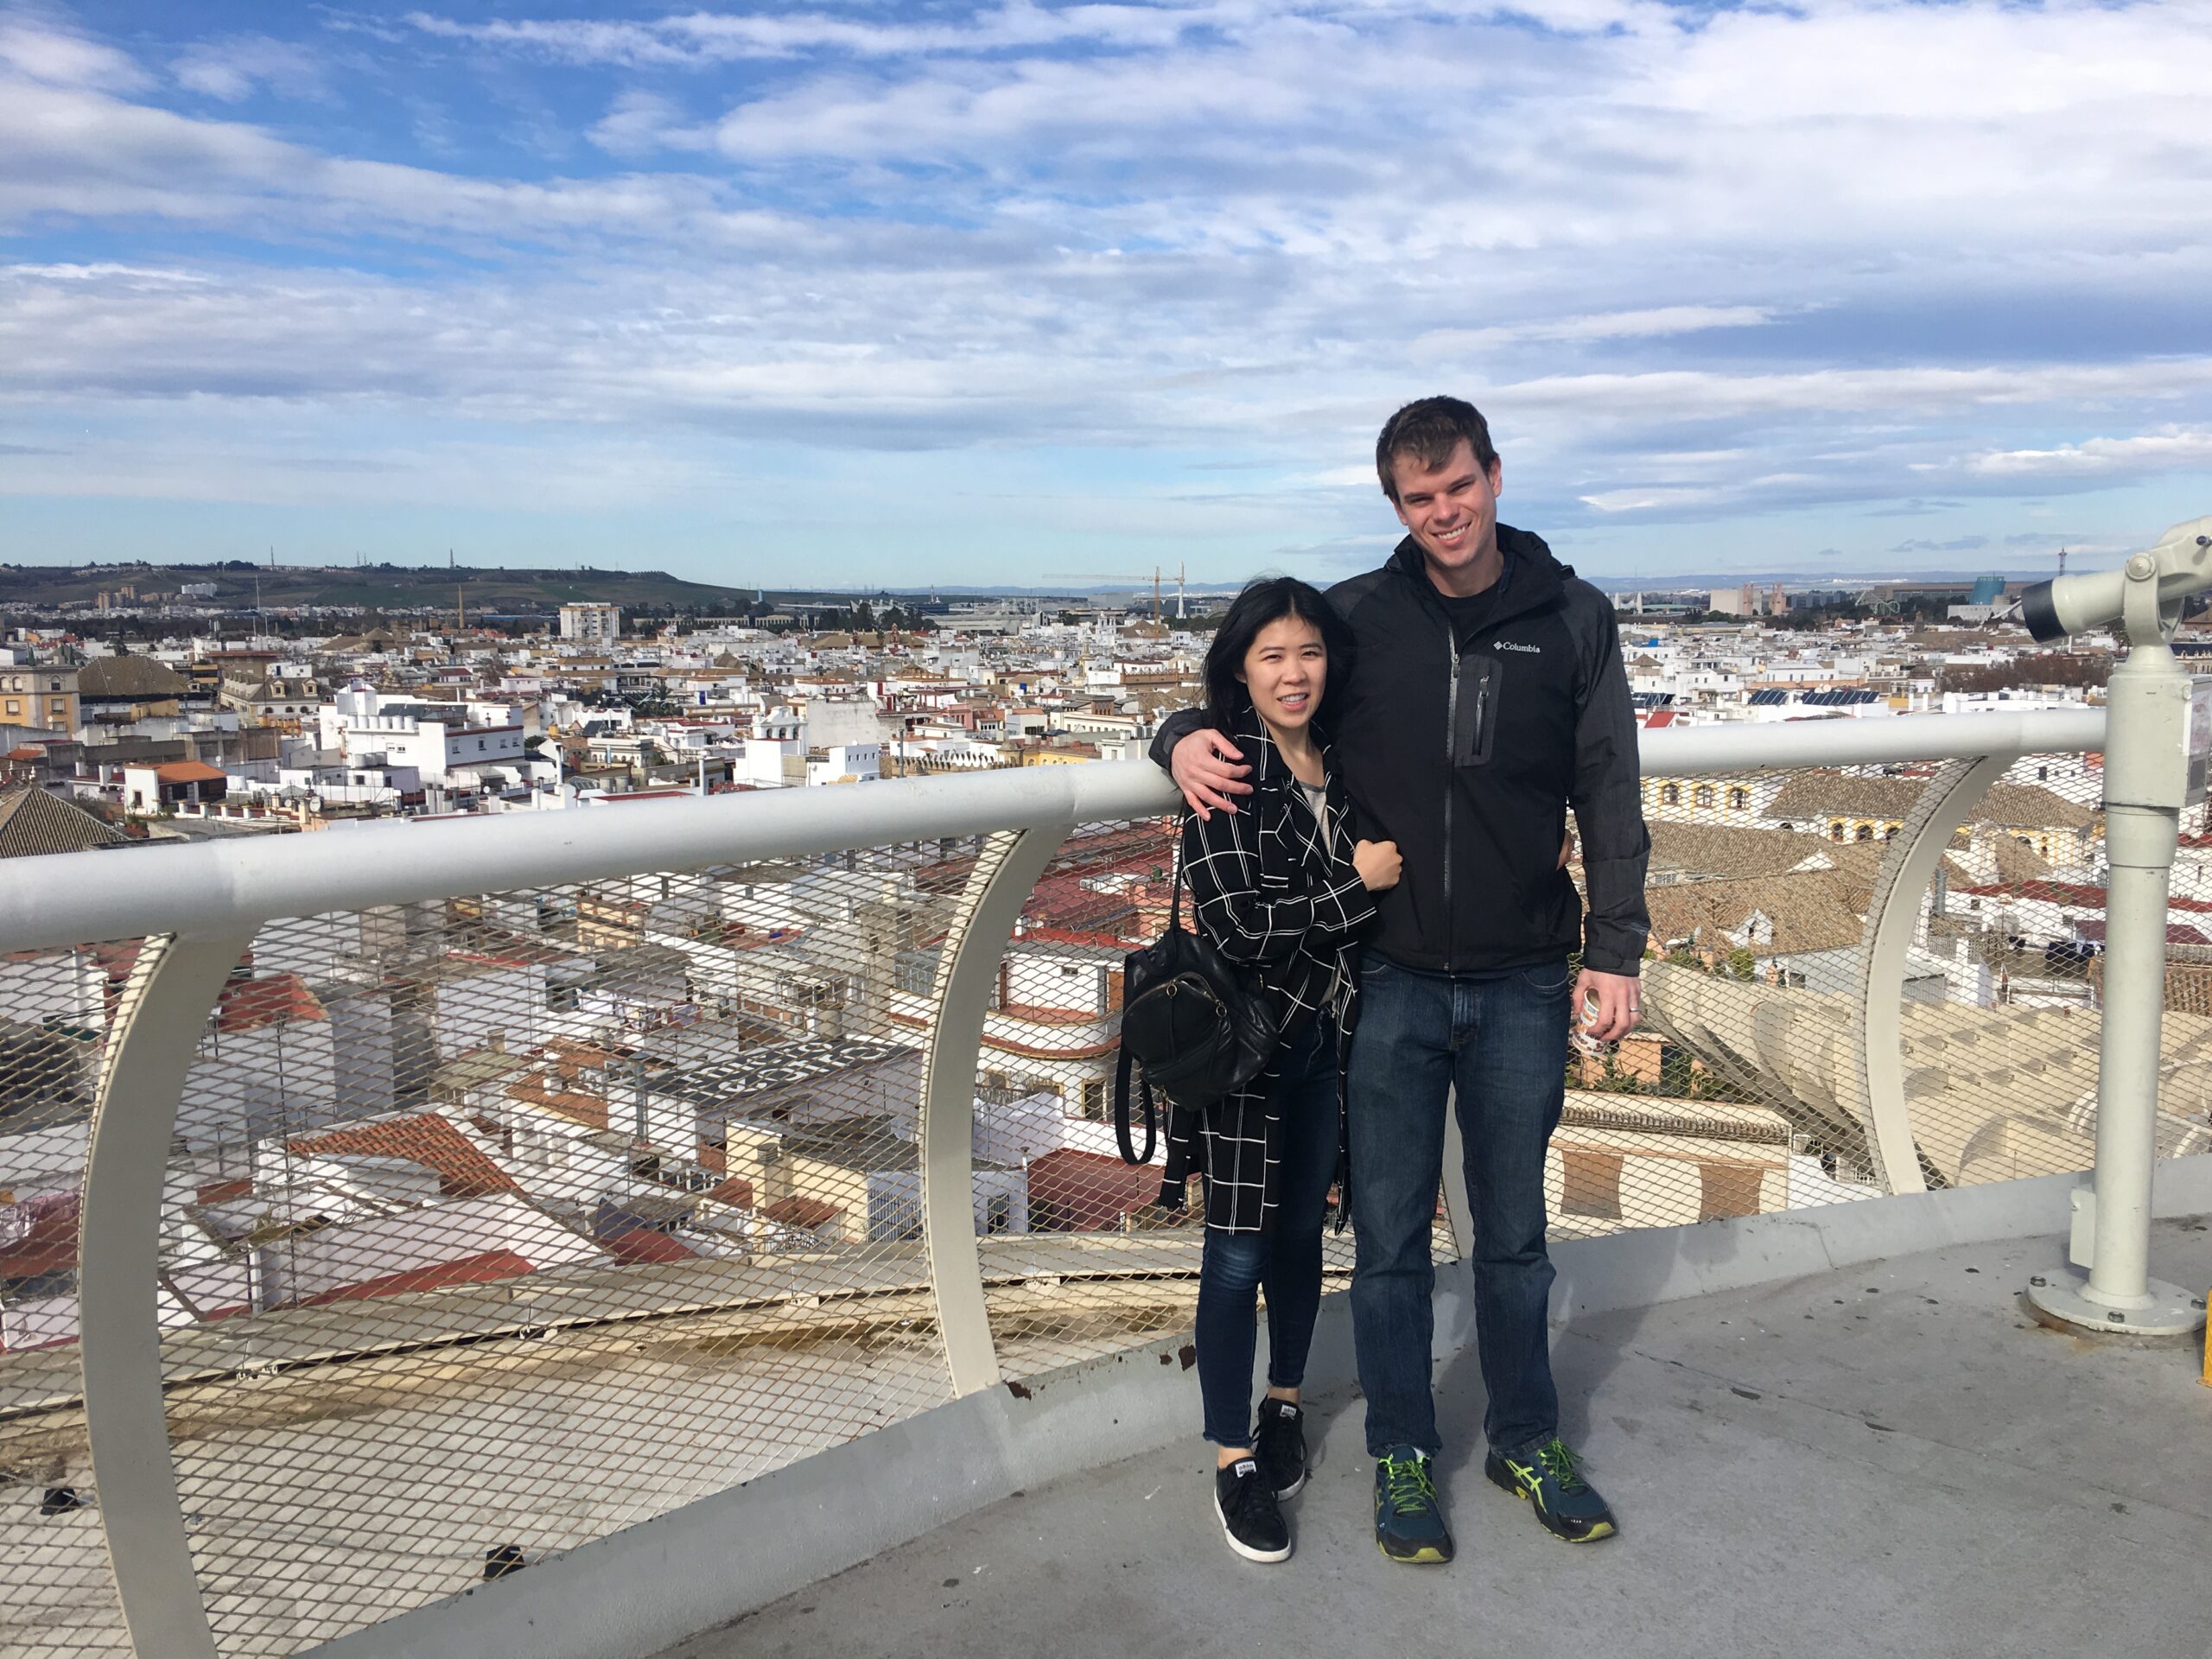 Views from the Metropol Parasol Seville